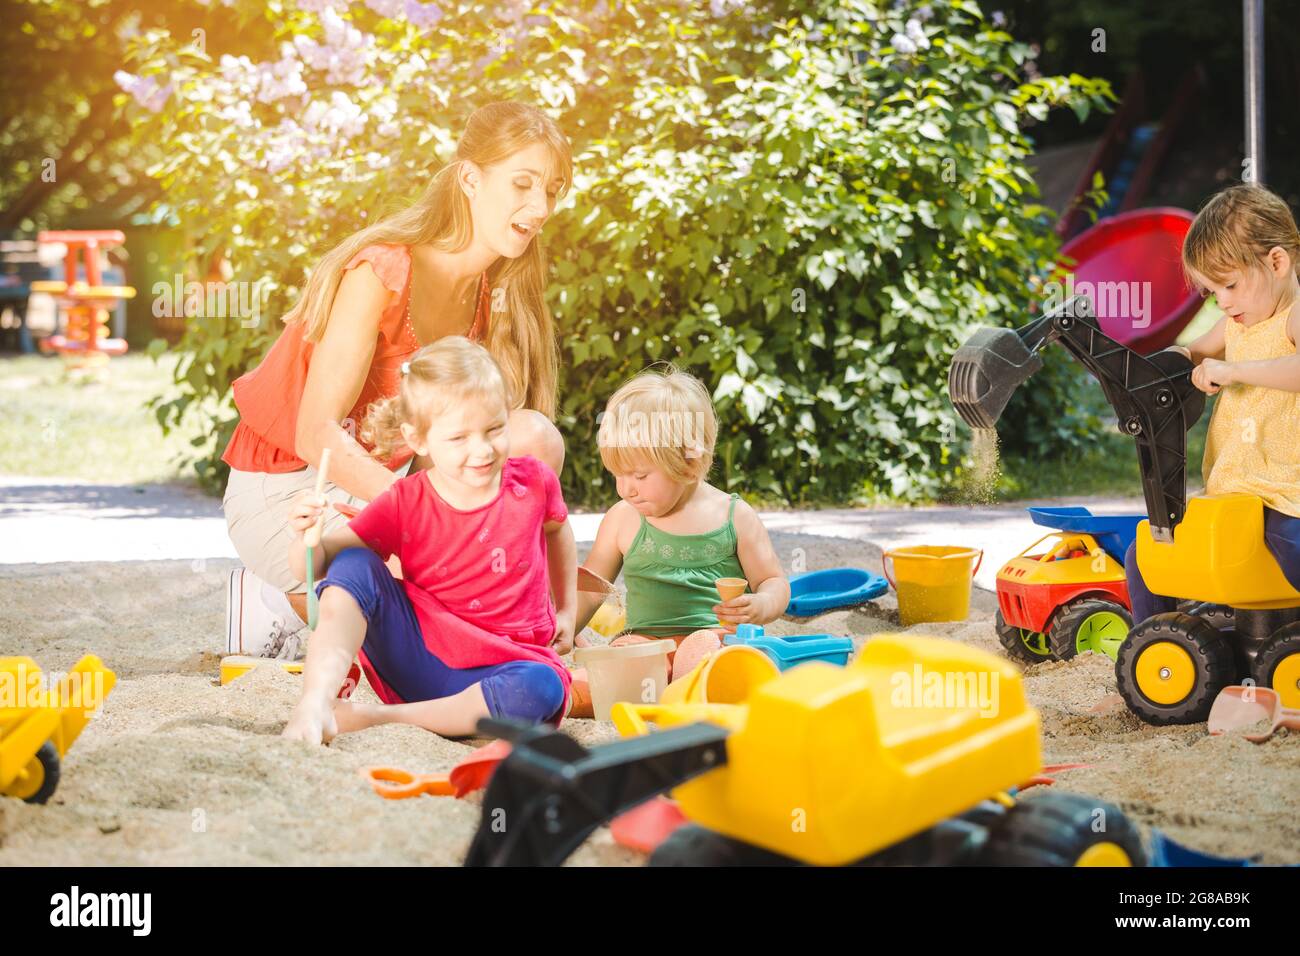 Children and play school teacher enjoying some time in sand box Stock Photo